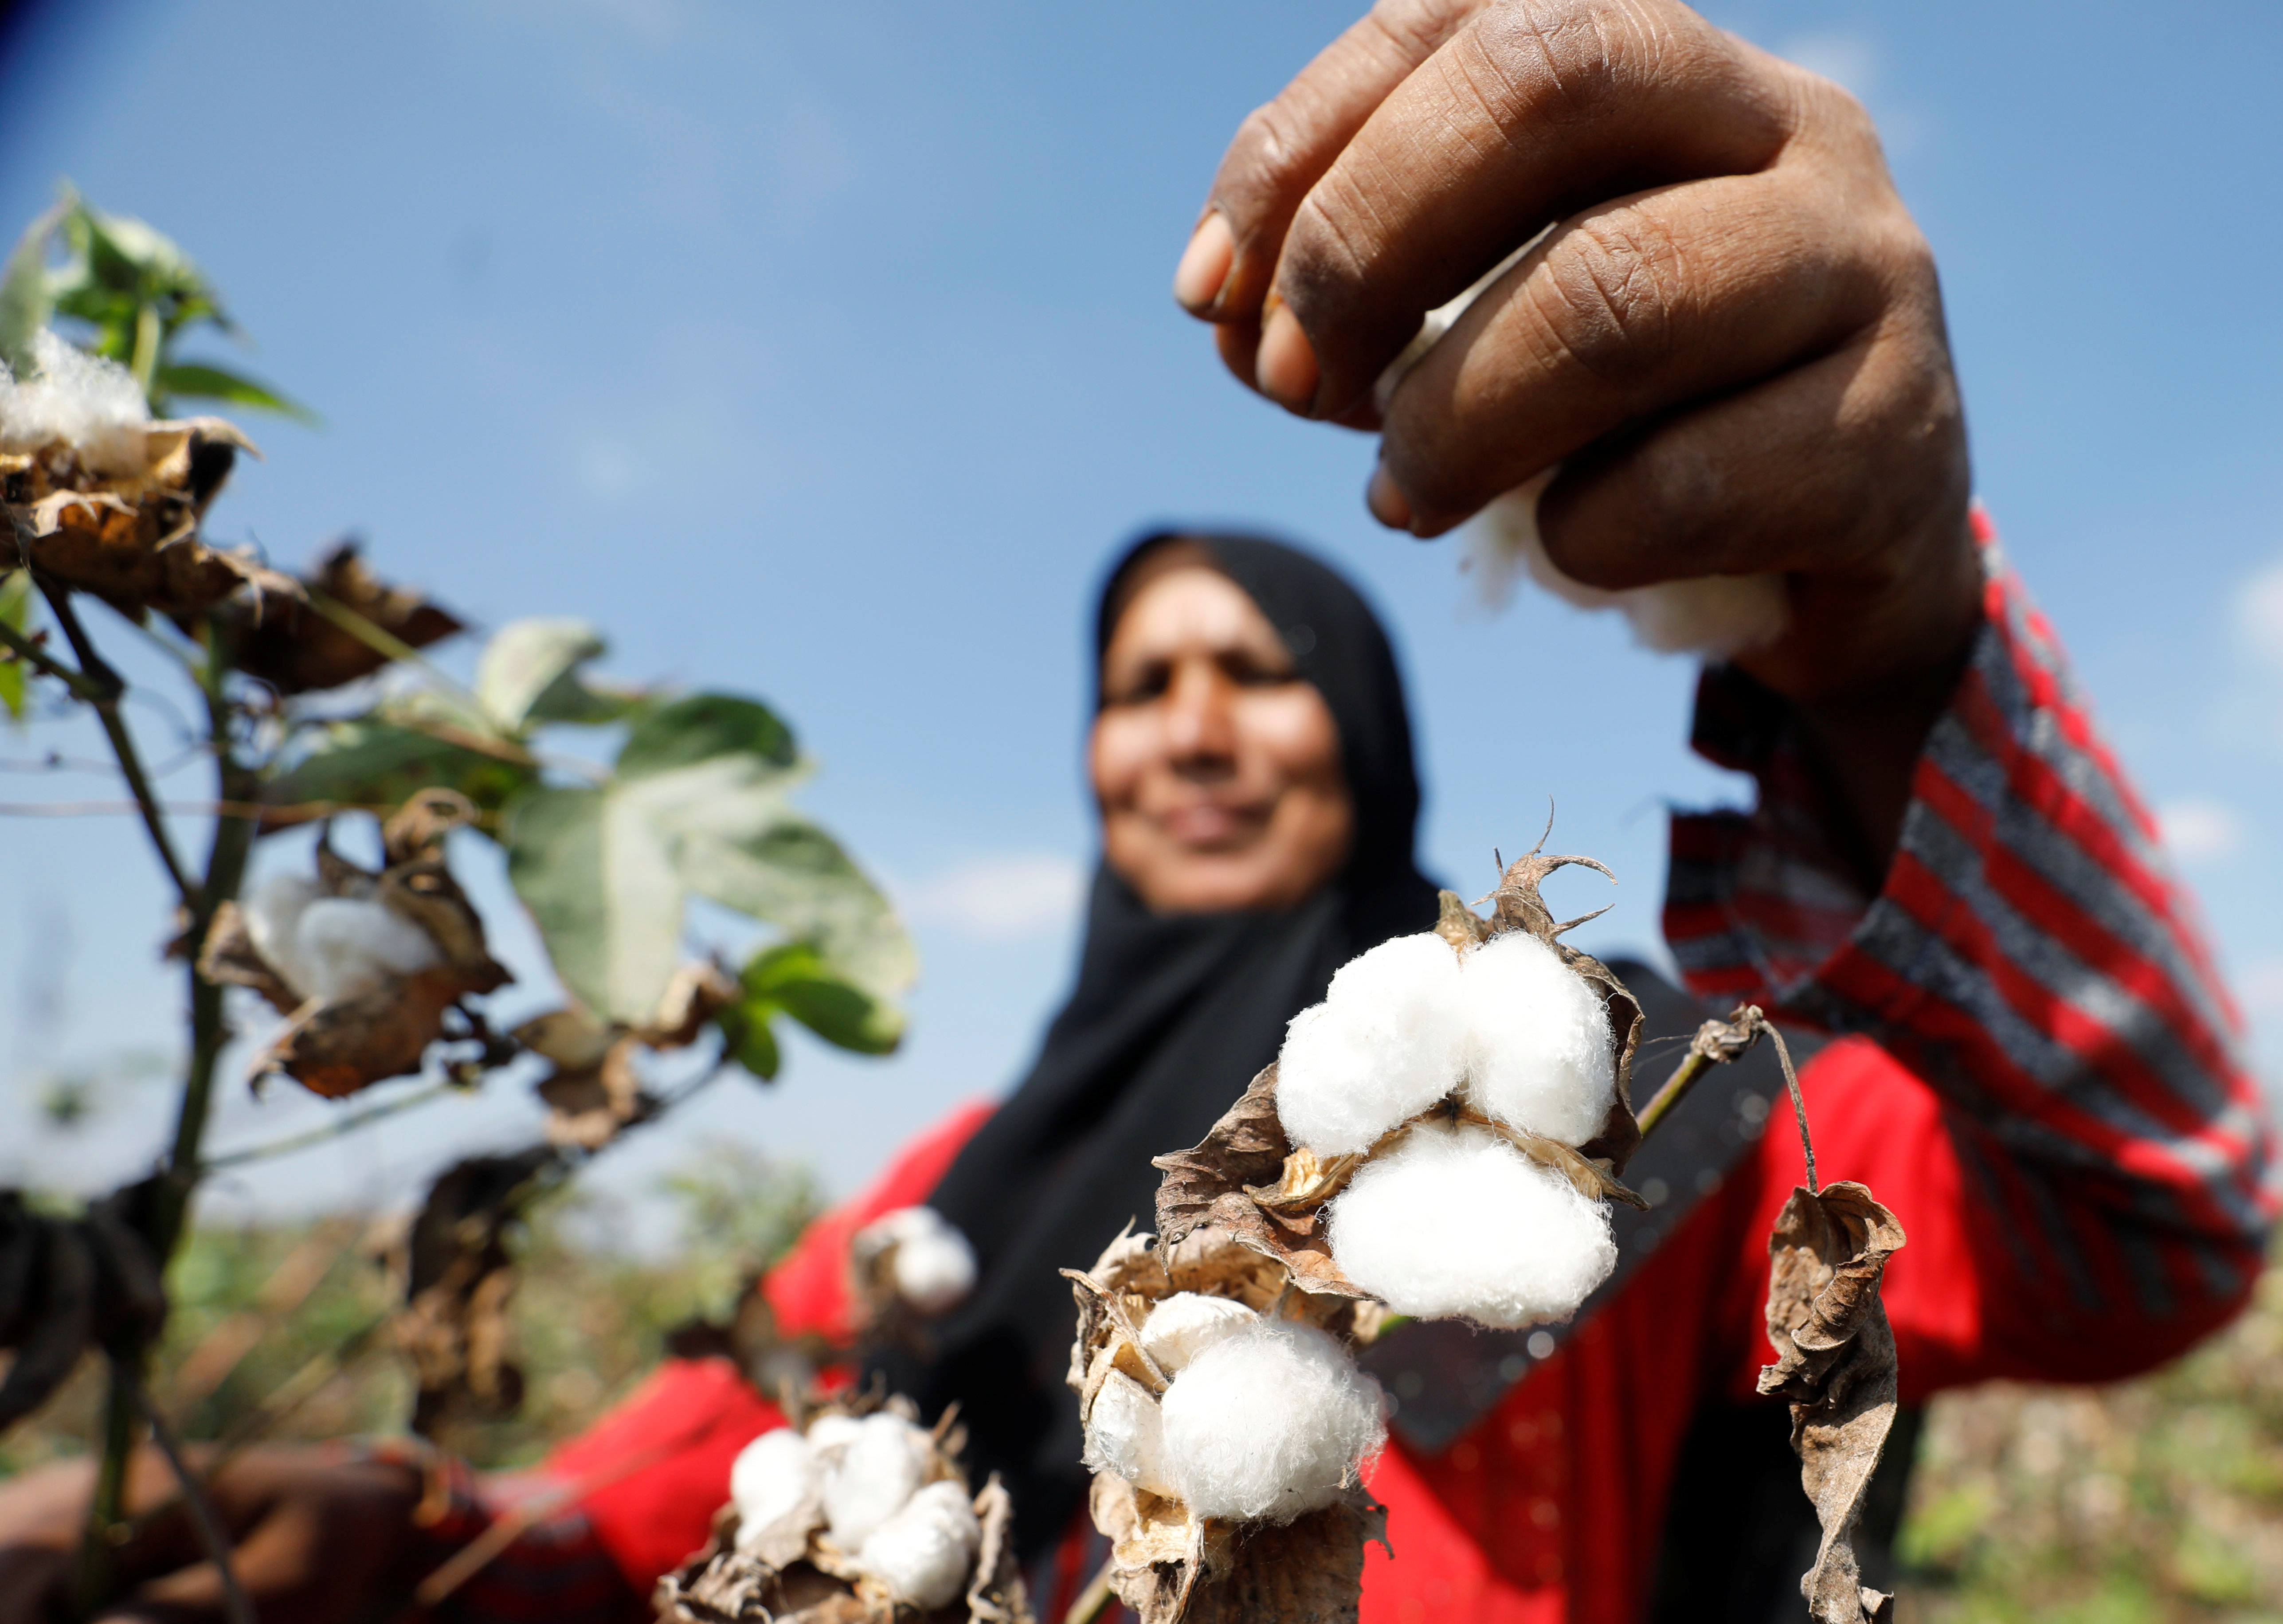 A farmer harvests cotton in a field in the province of Al-Sharkia northeast of Cairo